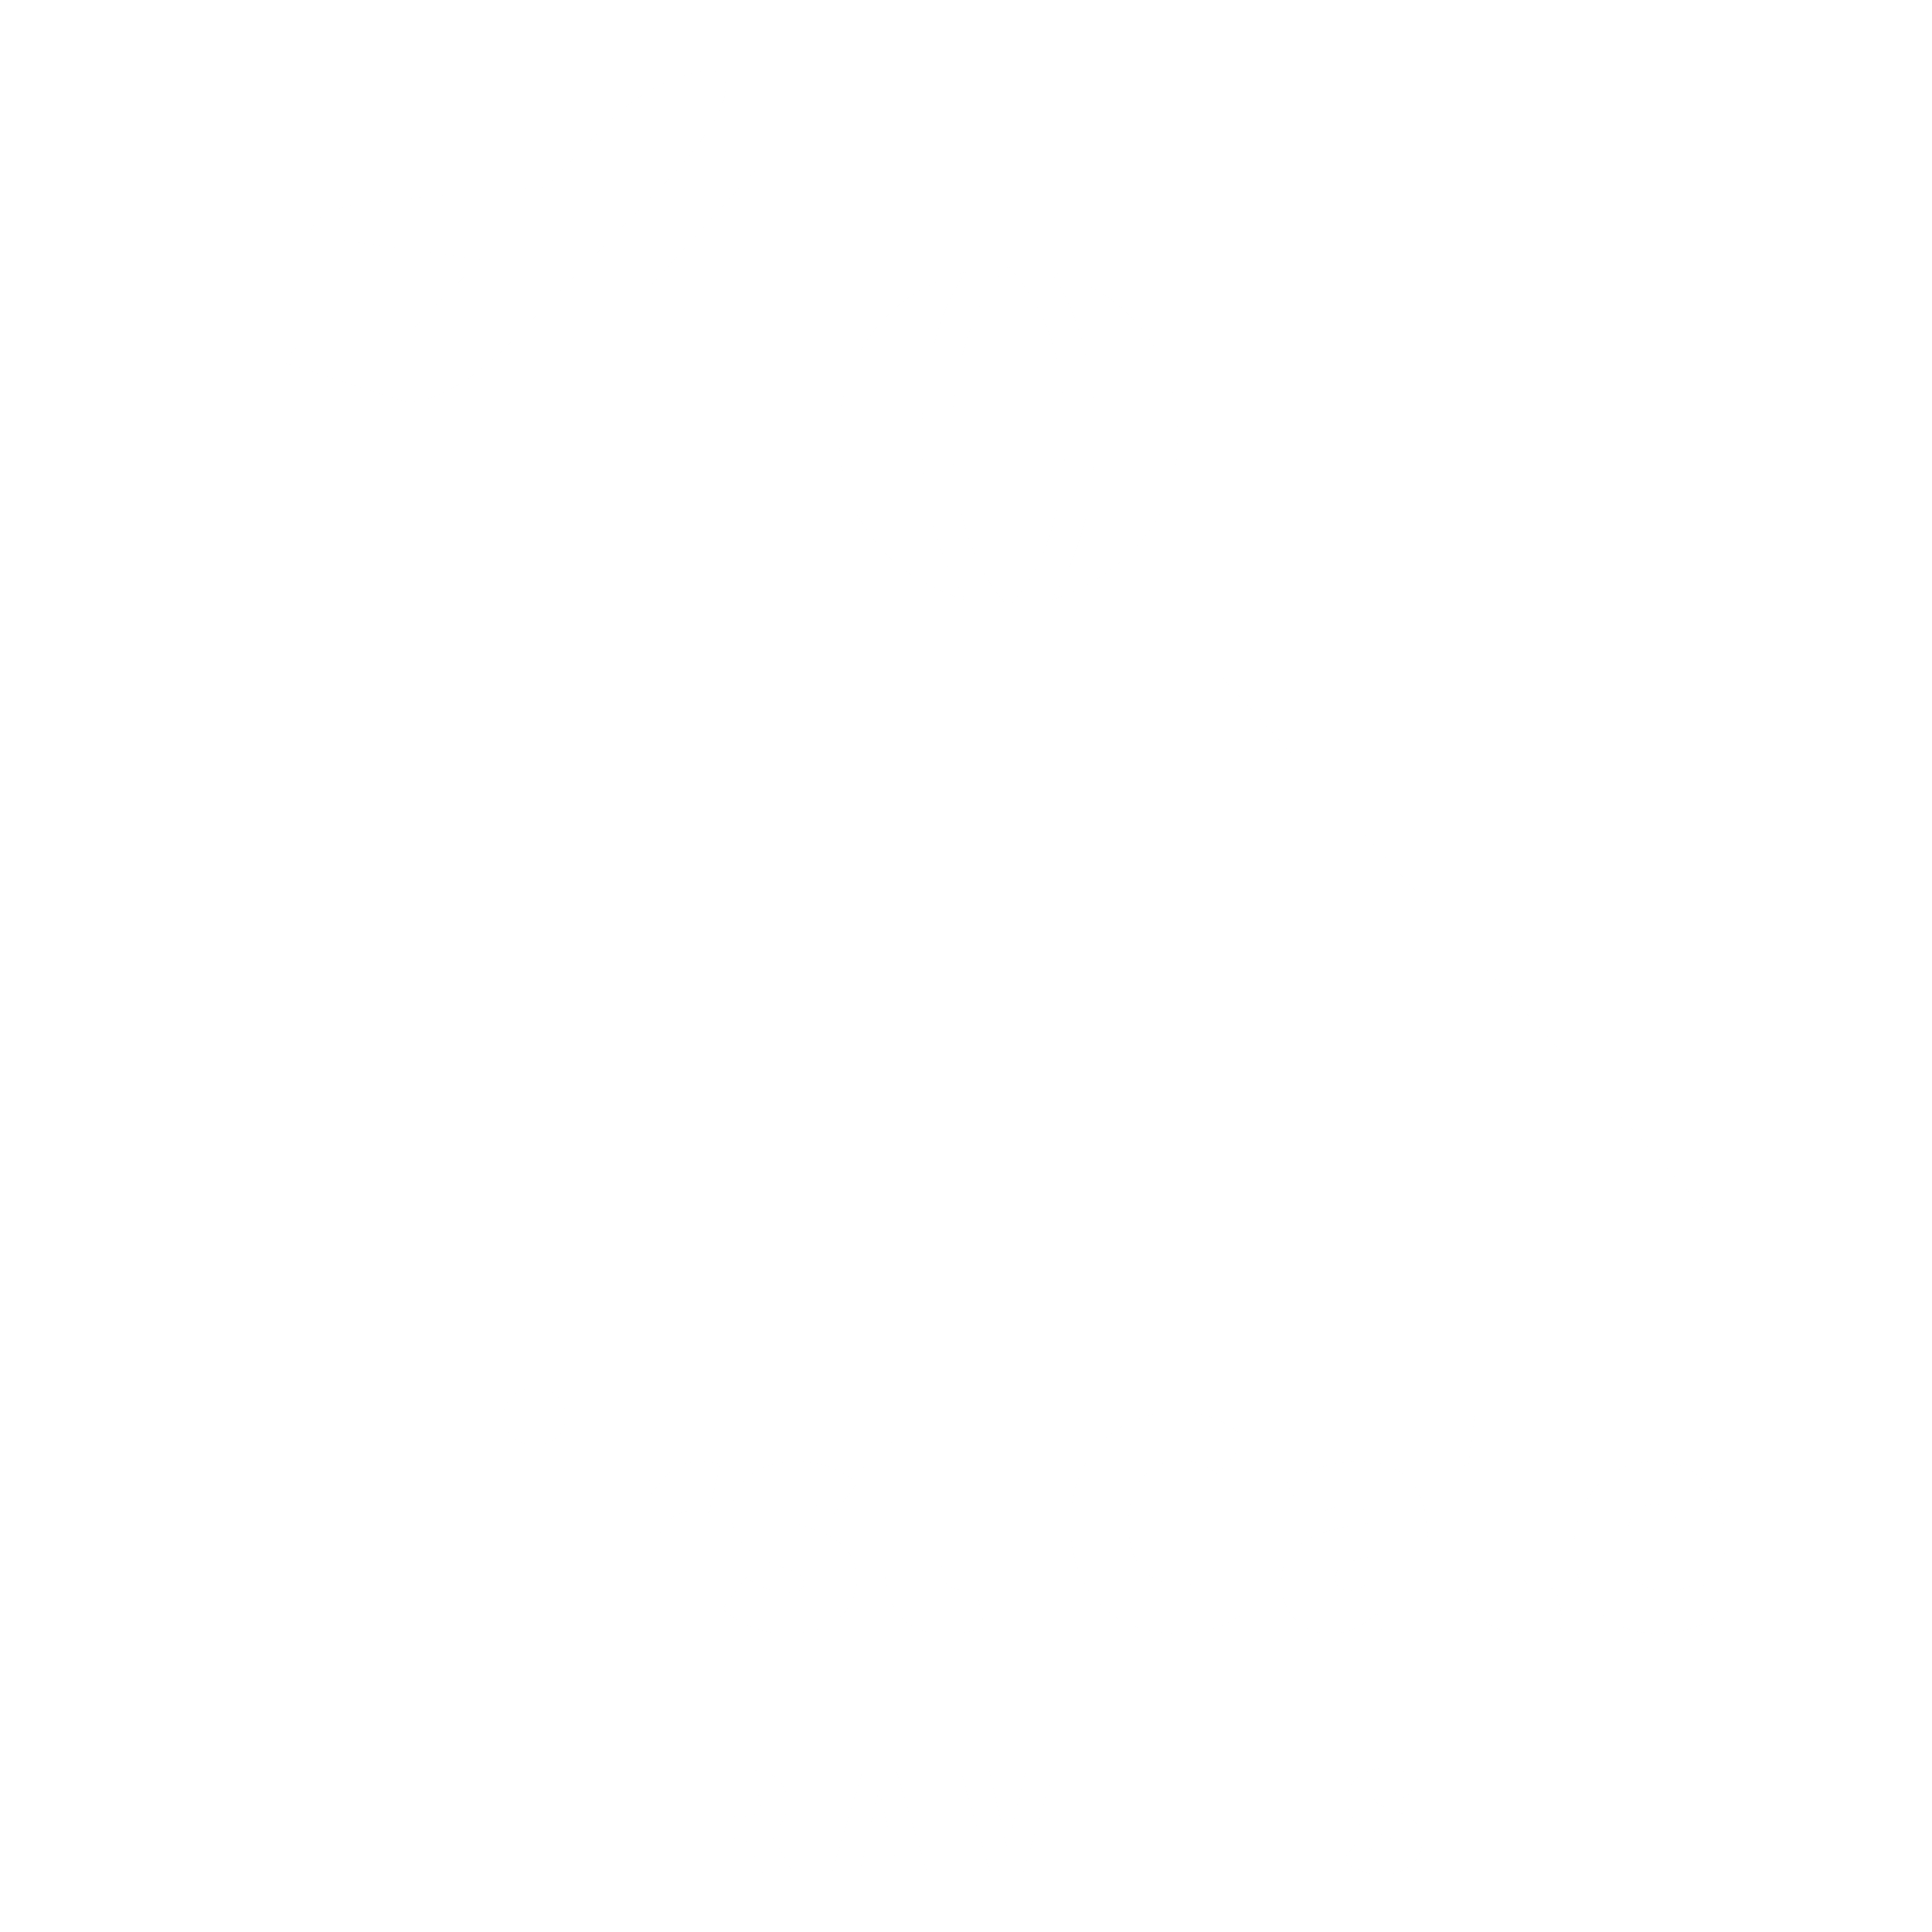 First Gate Travels